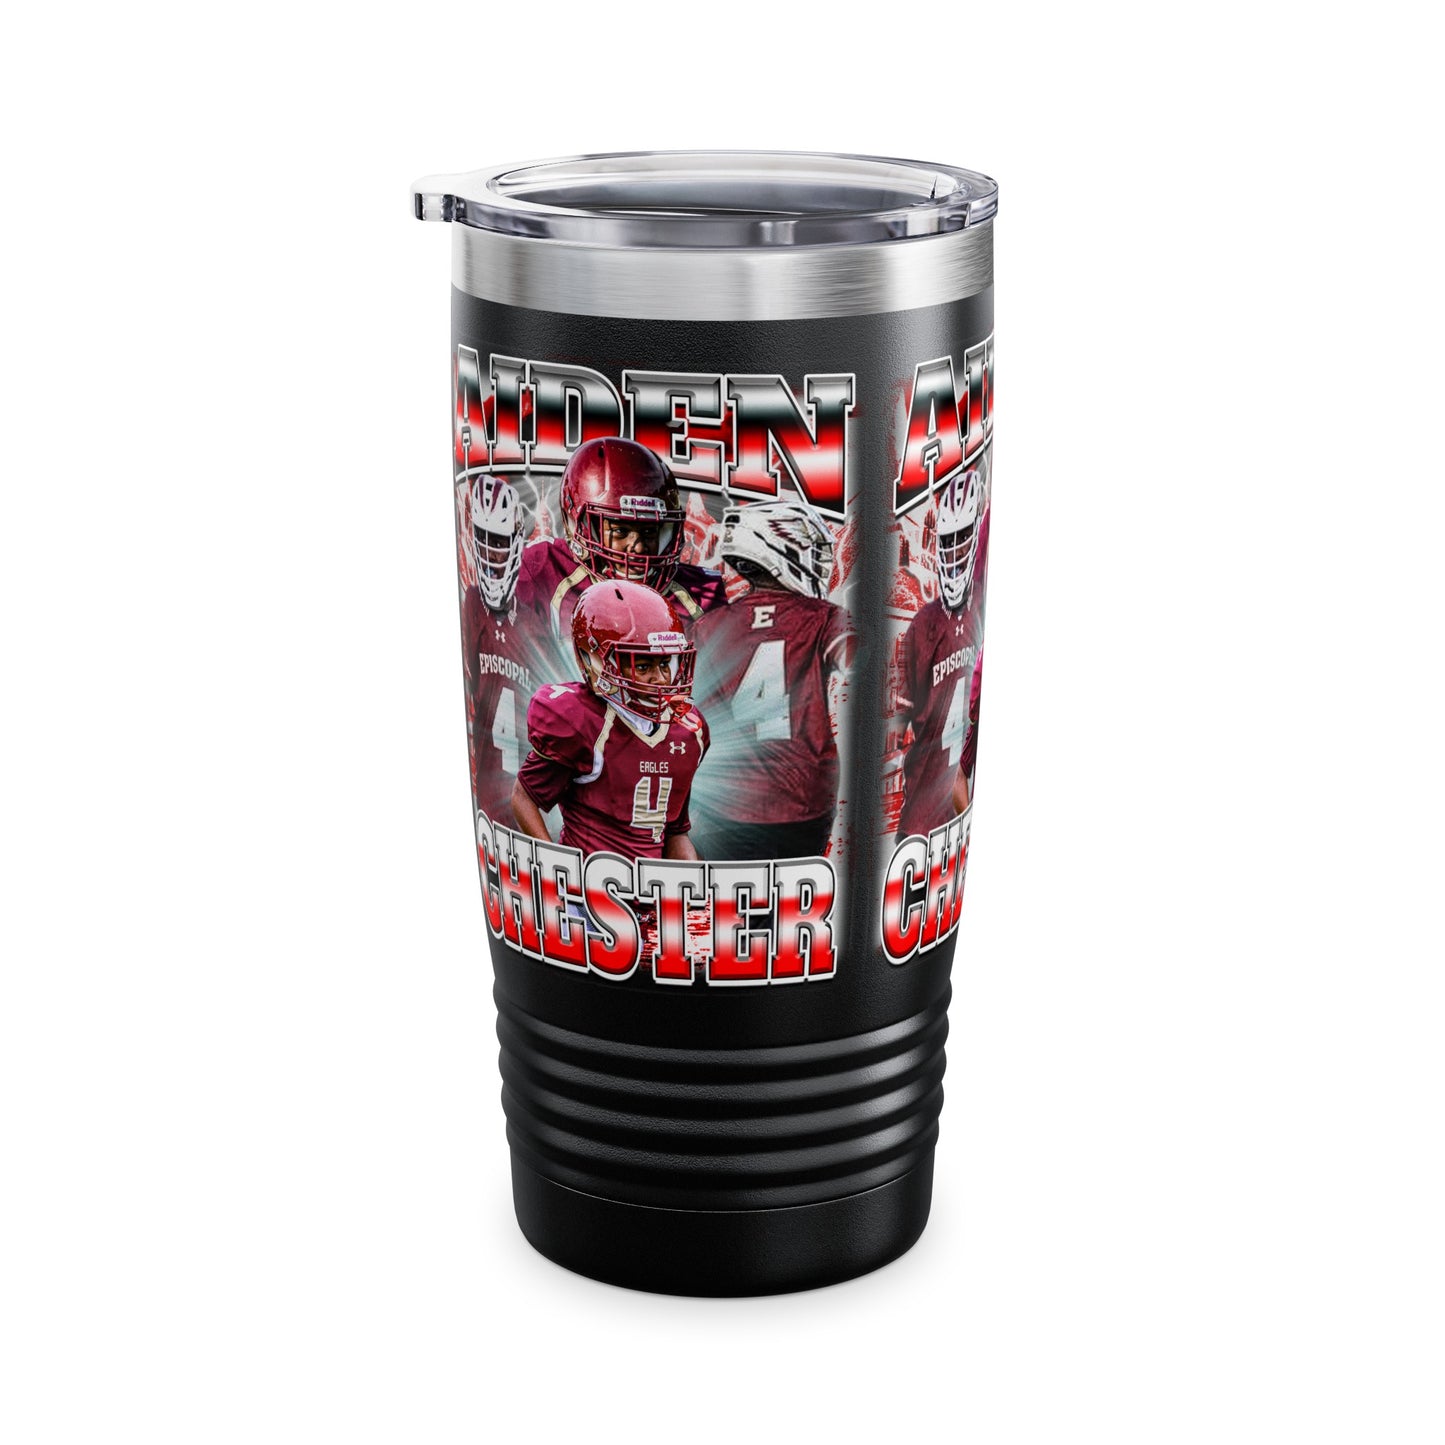 Aiden Chester Stainless Steal Tumbler